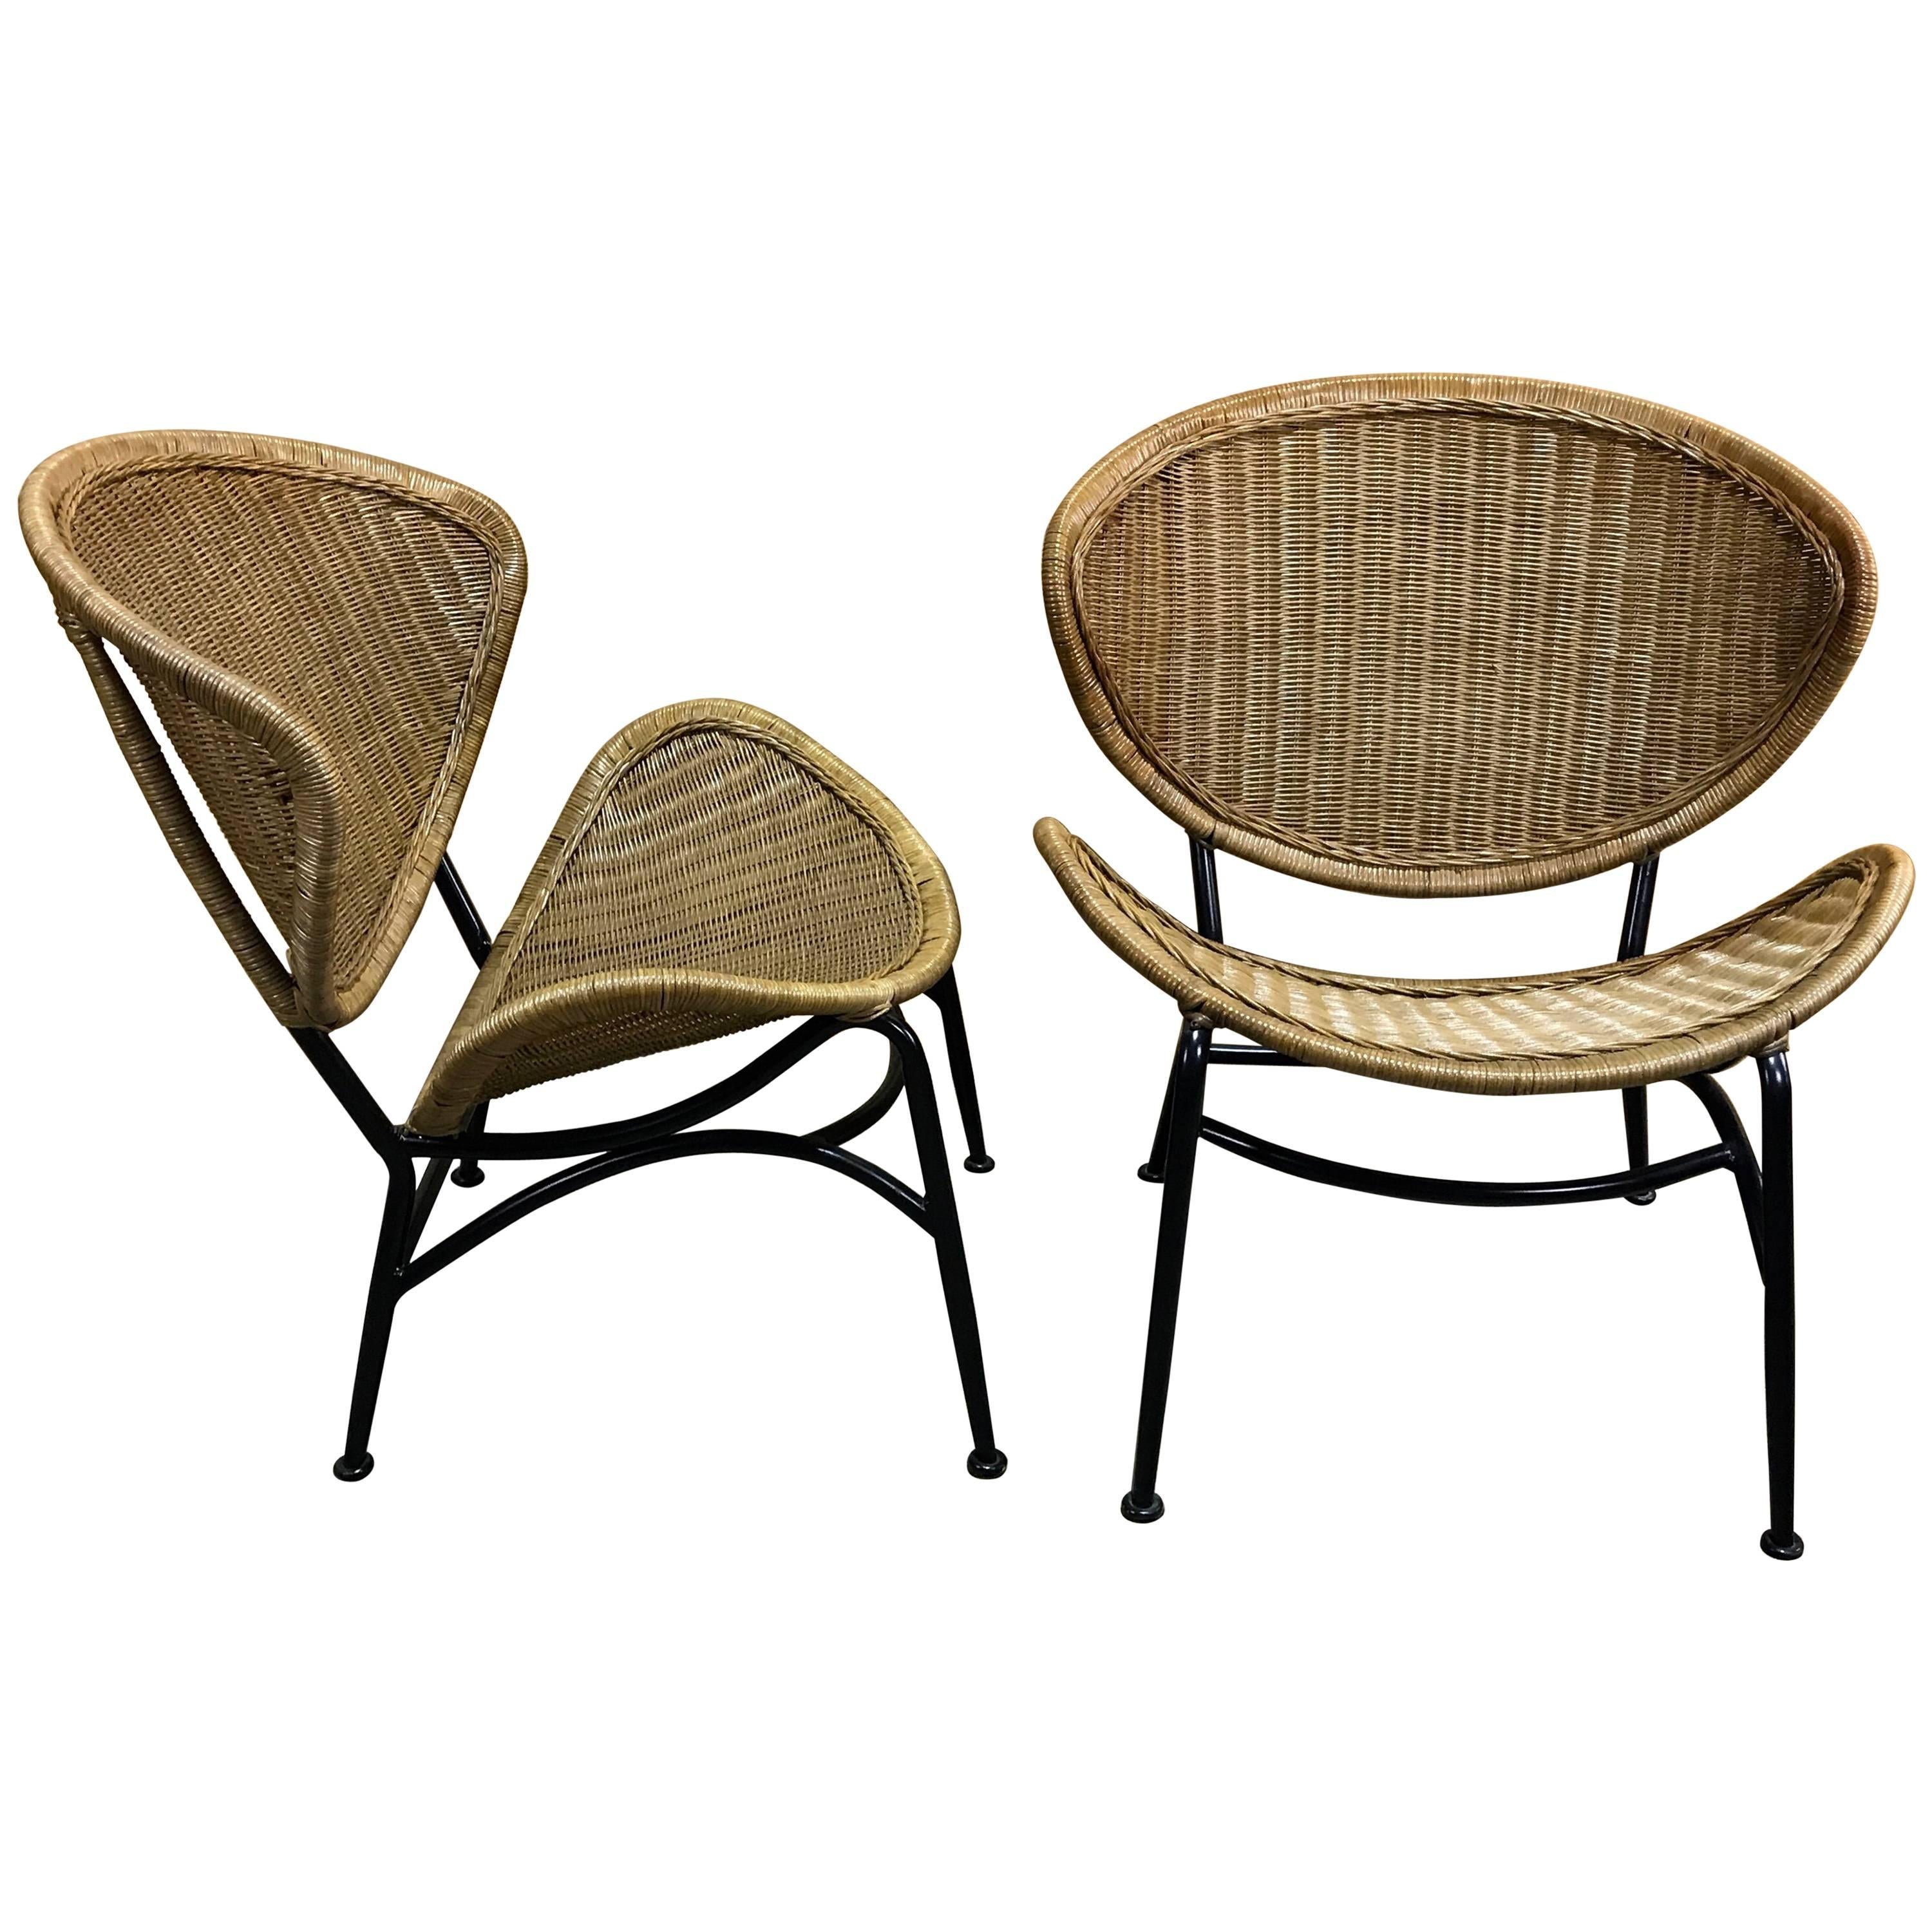 Pair of Midcentury Crescent Shaped Wicker Lounge Chairs, Restored